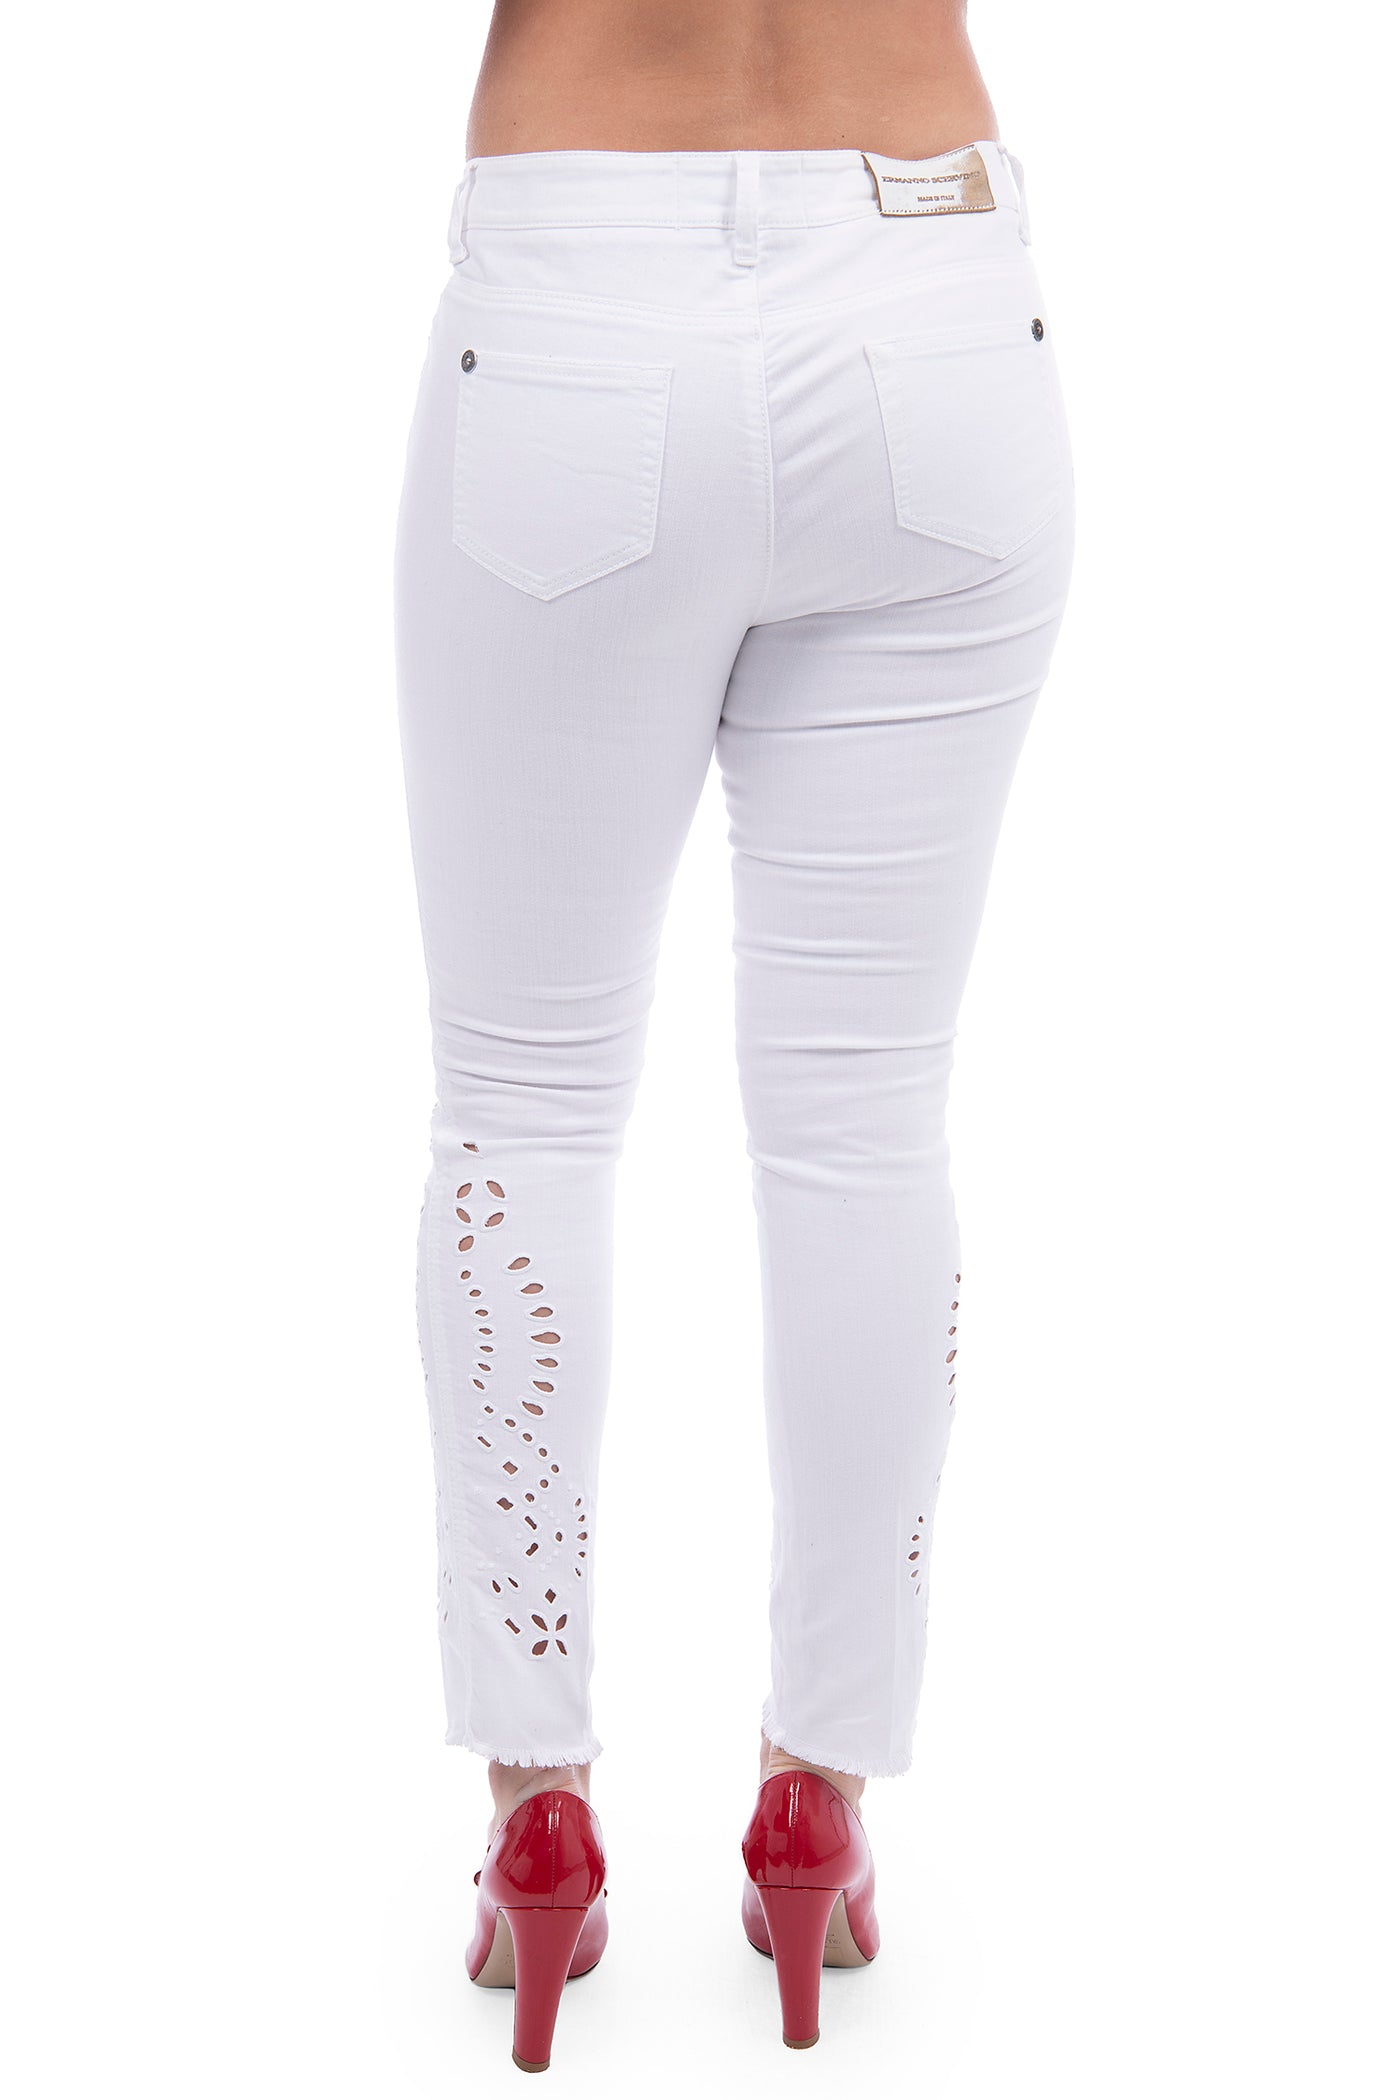 Ermanno Scervino white jeans with laser hole cut outs on legs